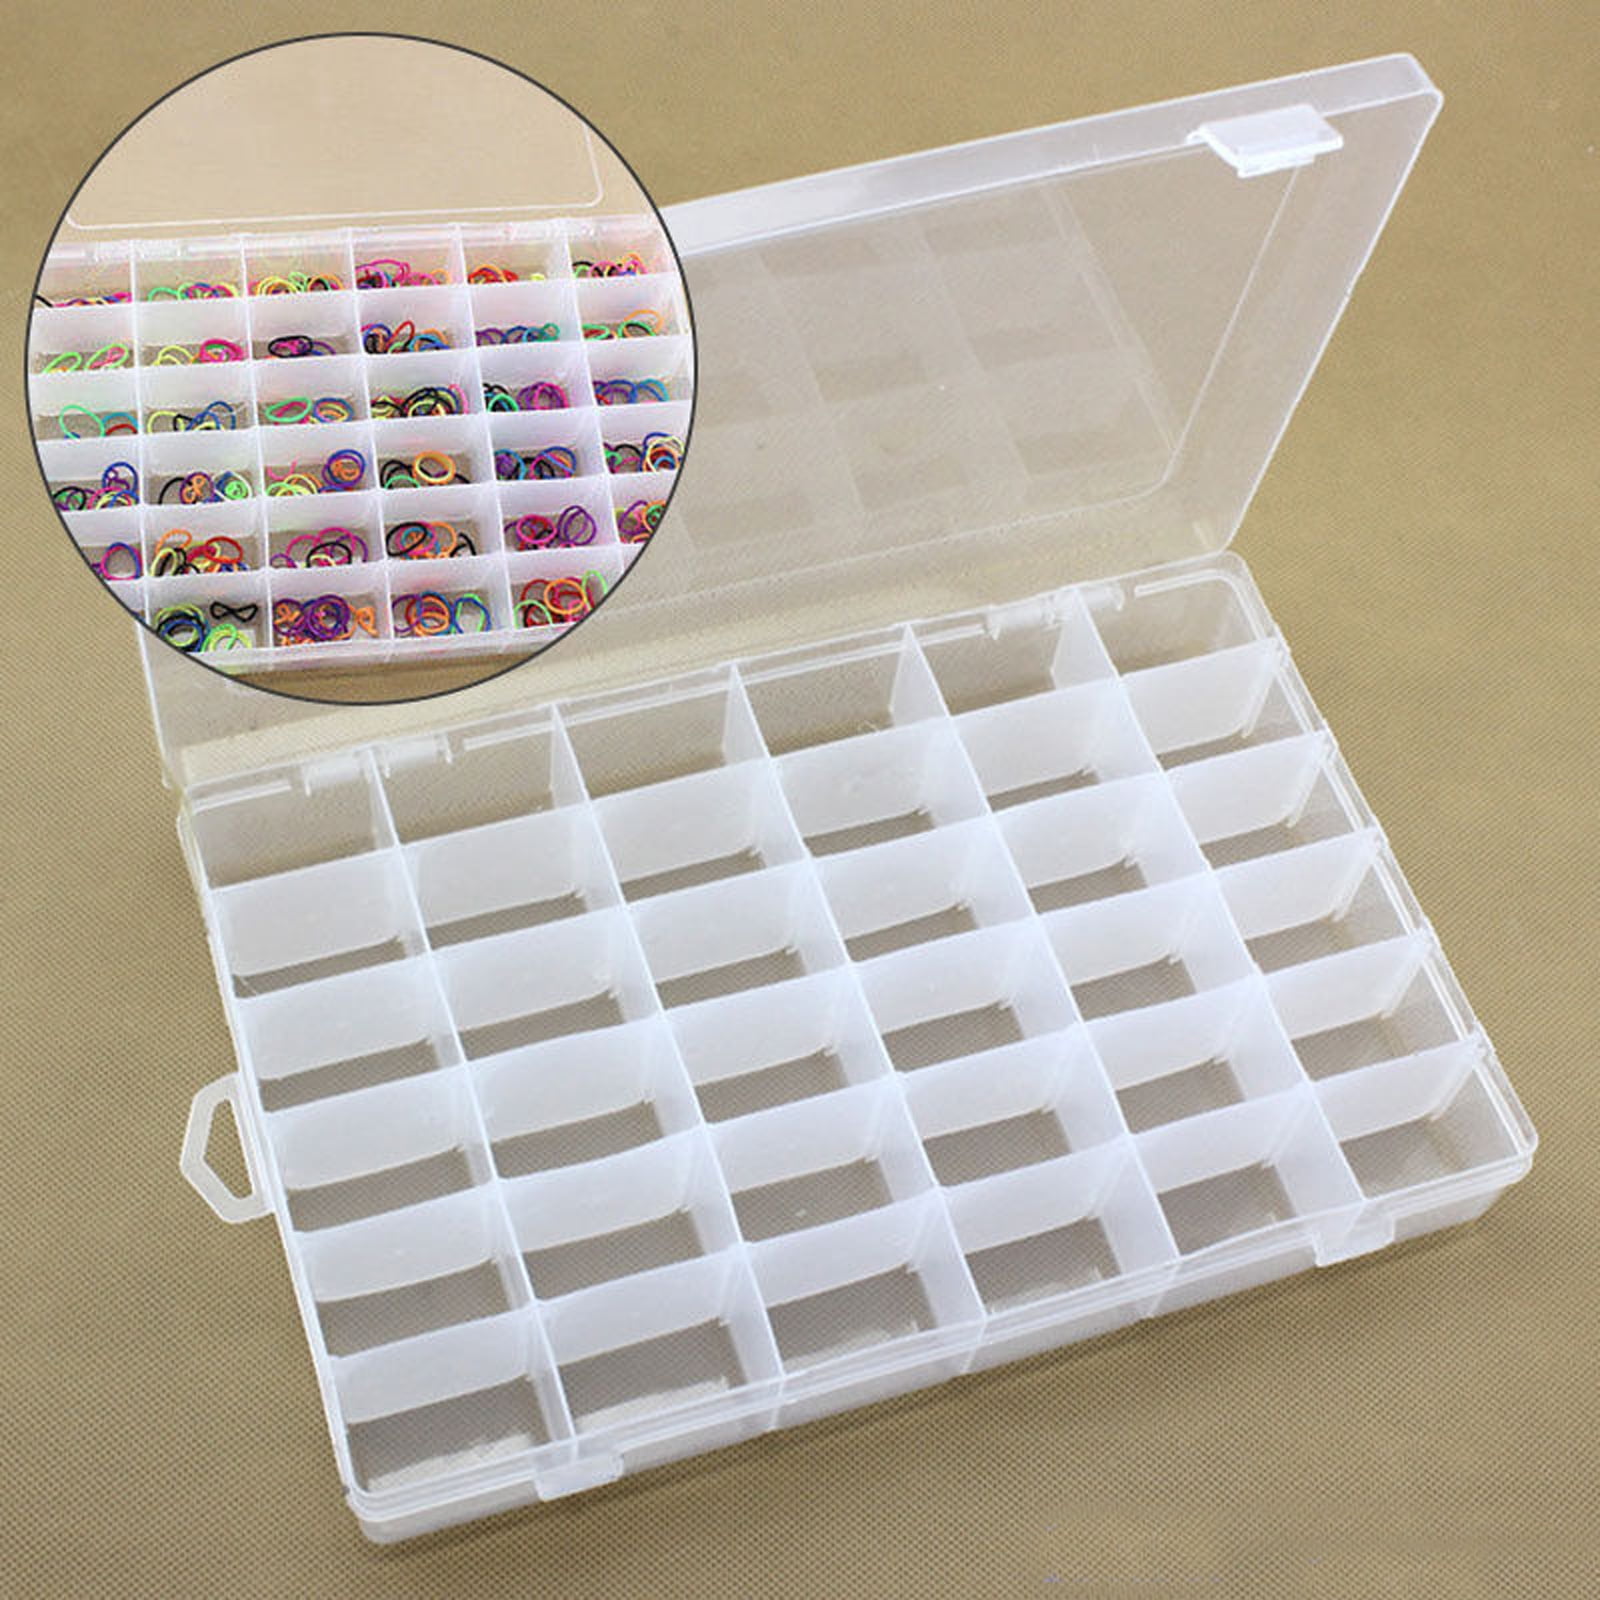 10/15/24 Slots Compartment Plastic Box Jewelry Bead Storage Container Org p D5D6 